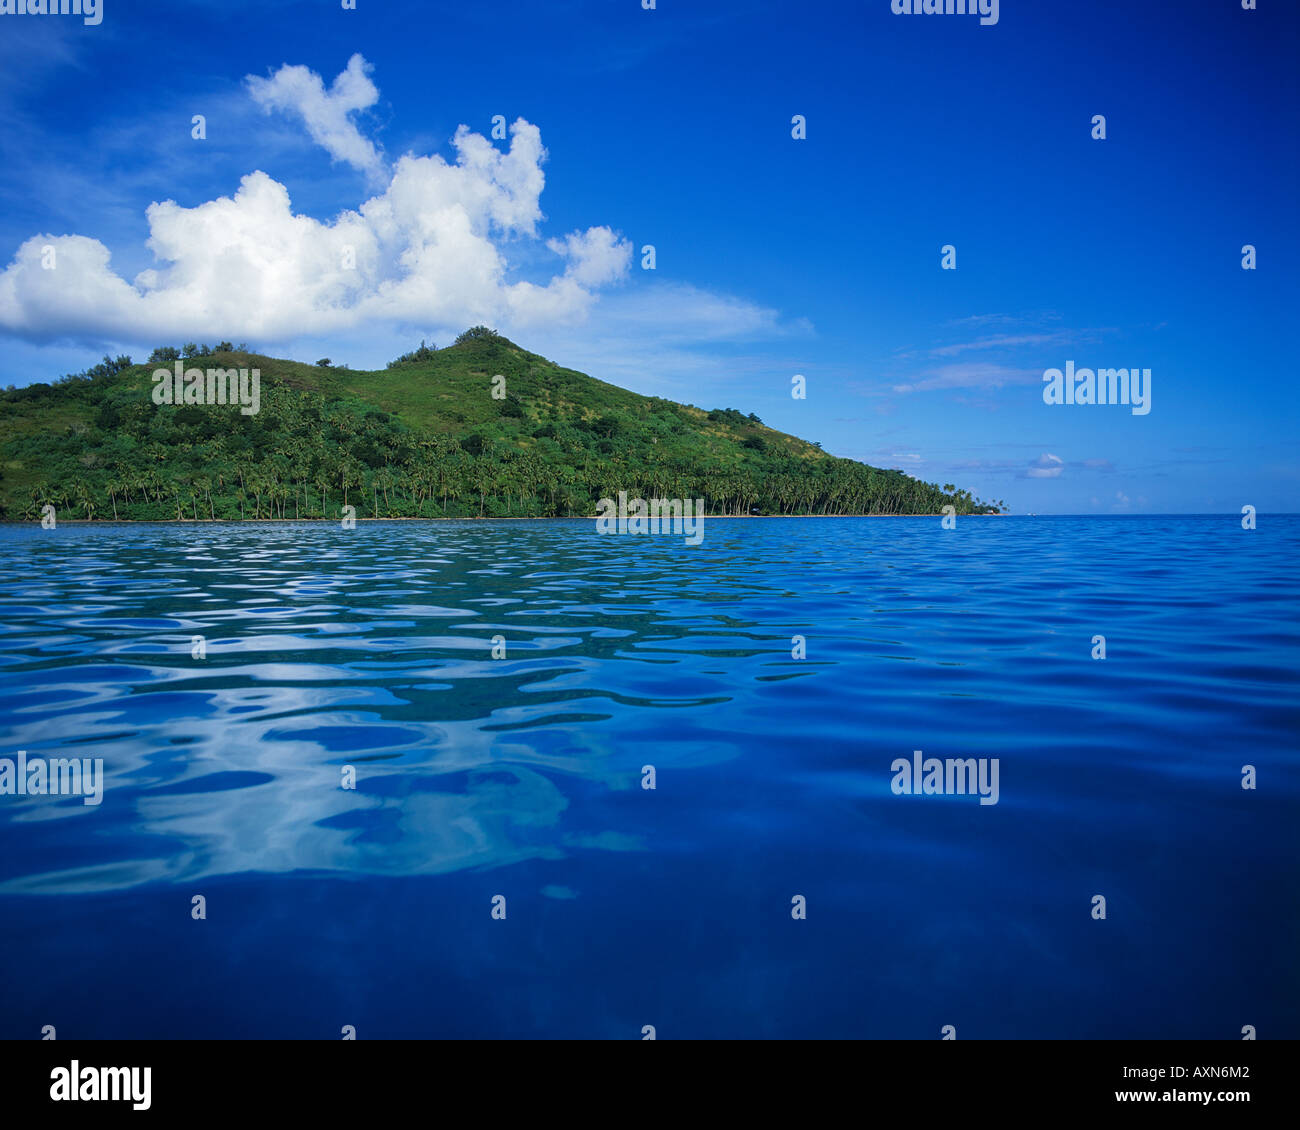 Motu Toopua with palm tree lined shore from the blue waters of Bora ...